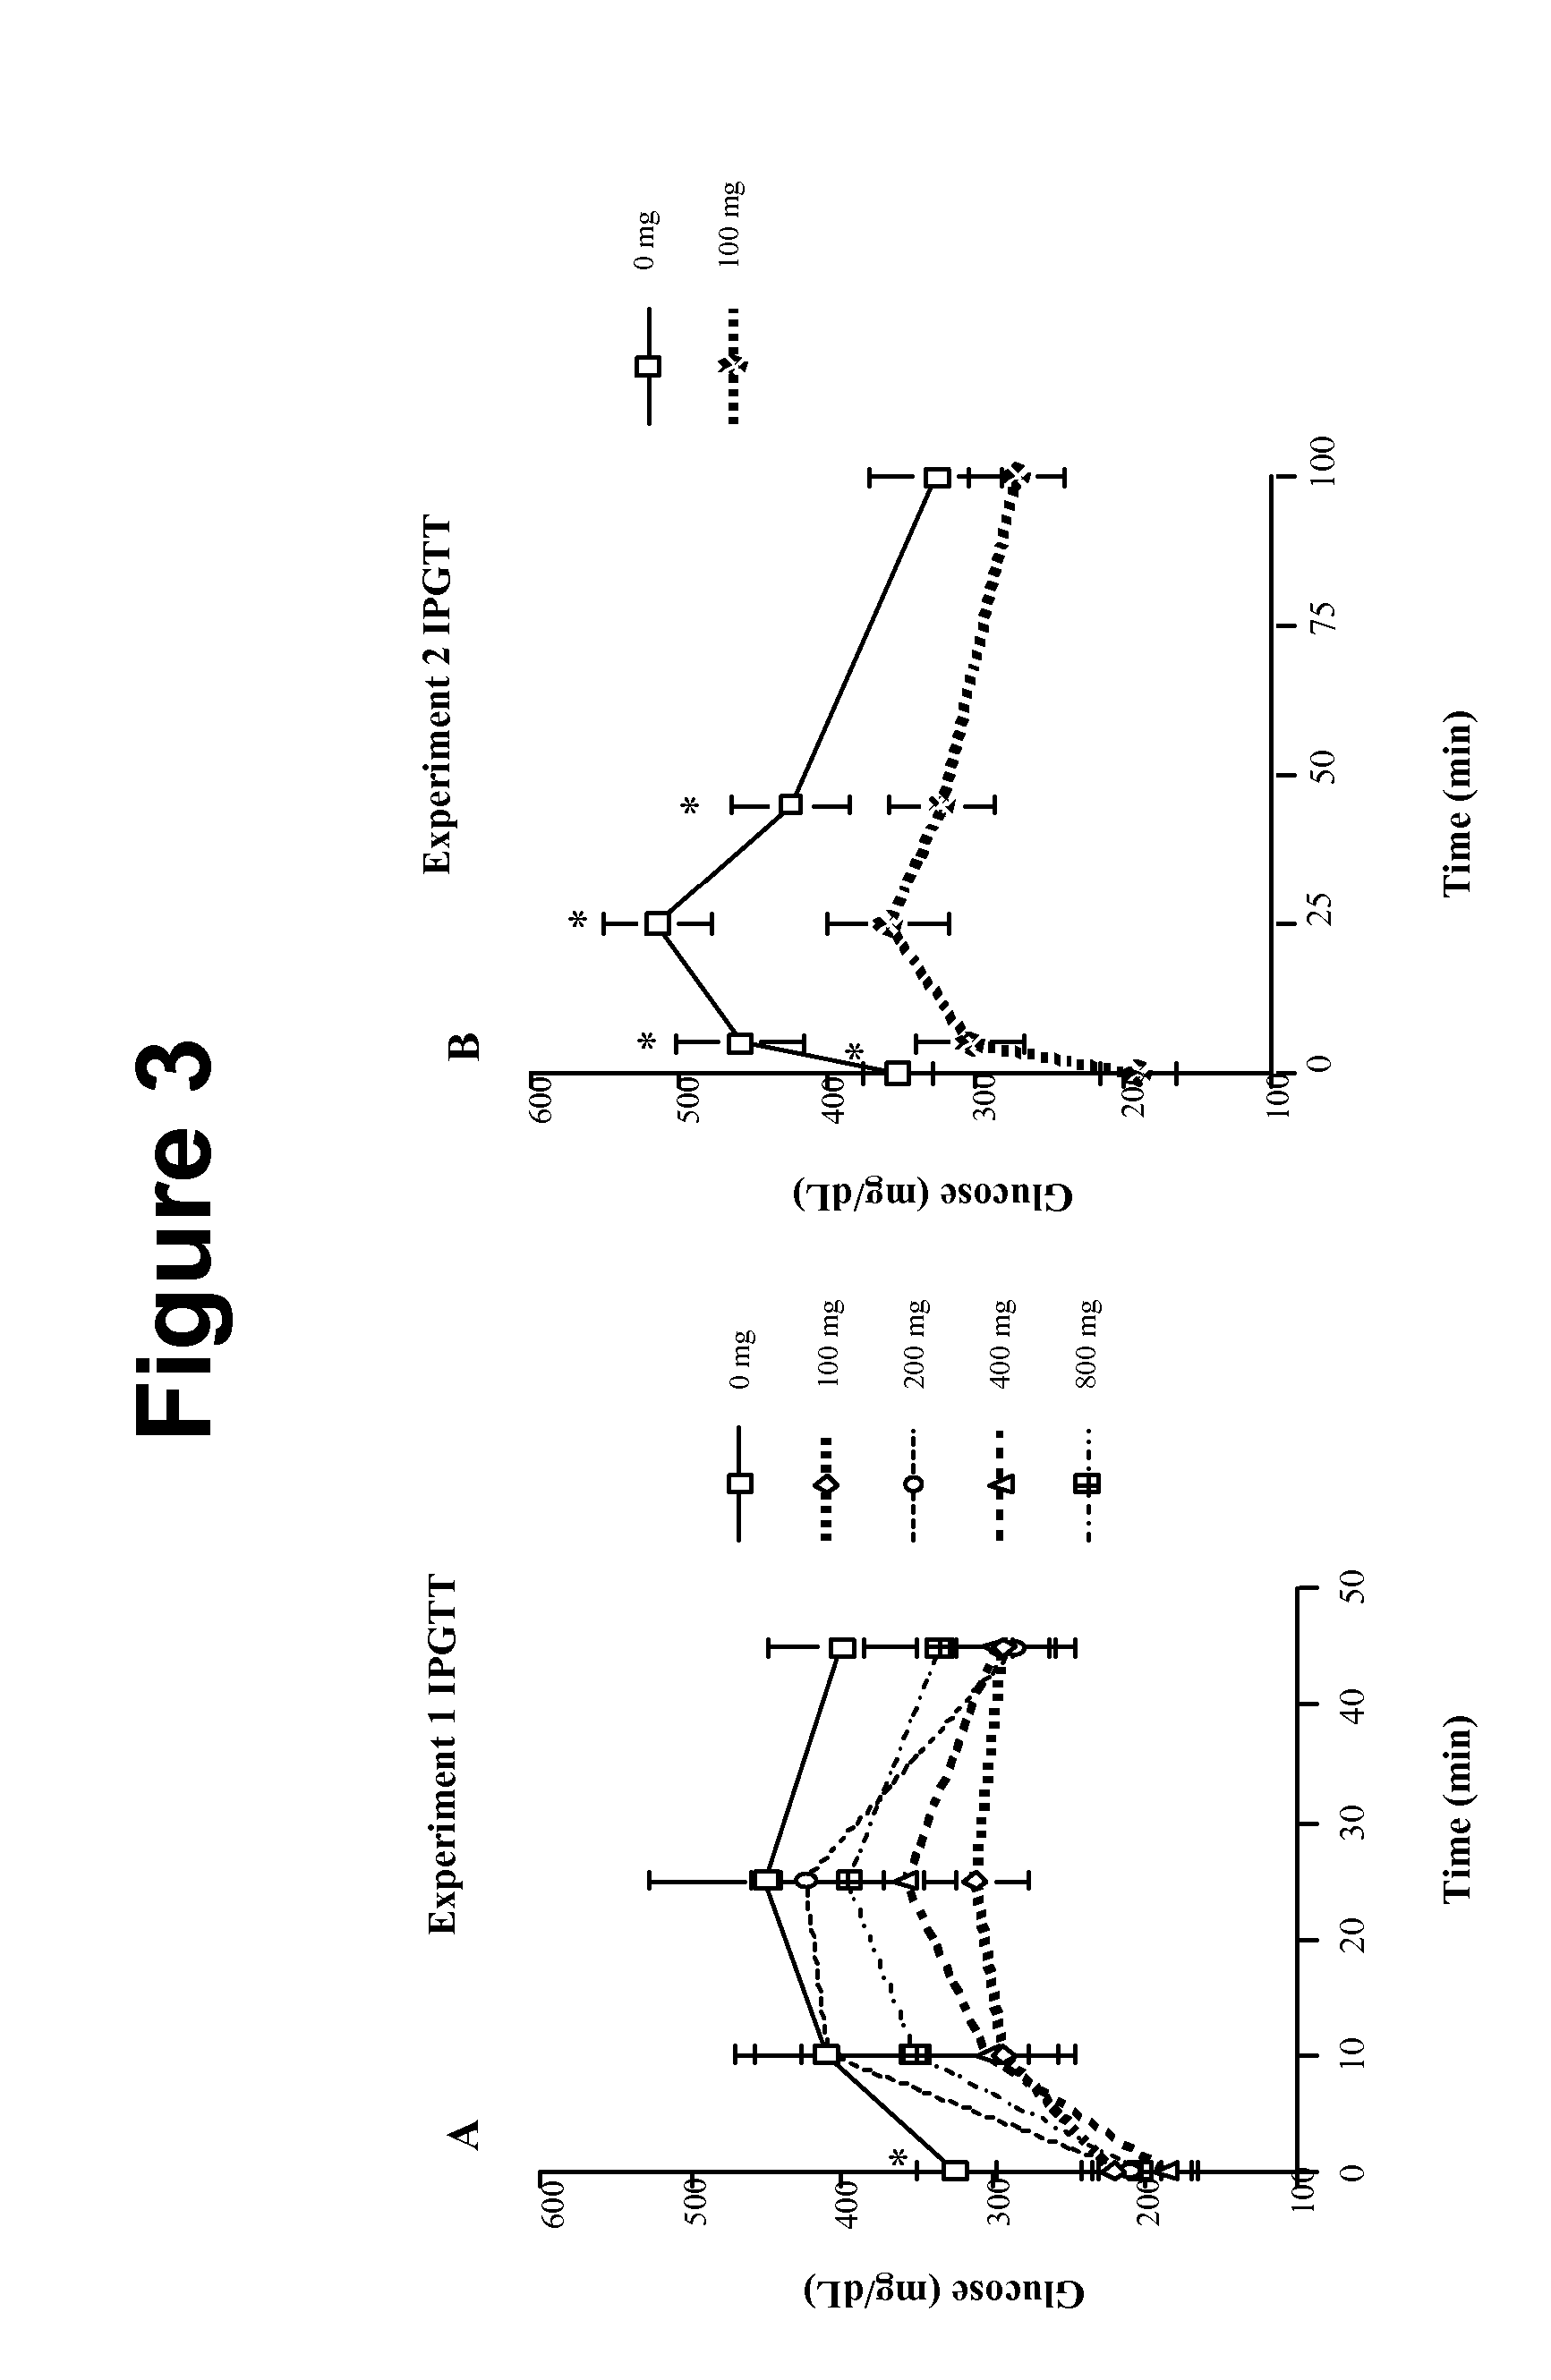 Method of using abscisic acid to treat diseases and disorders